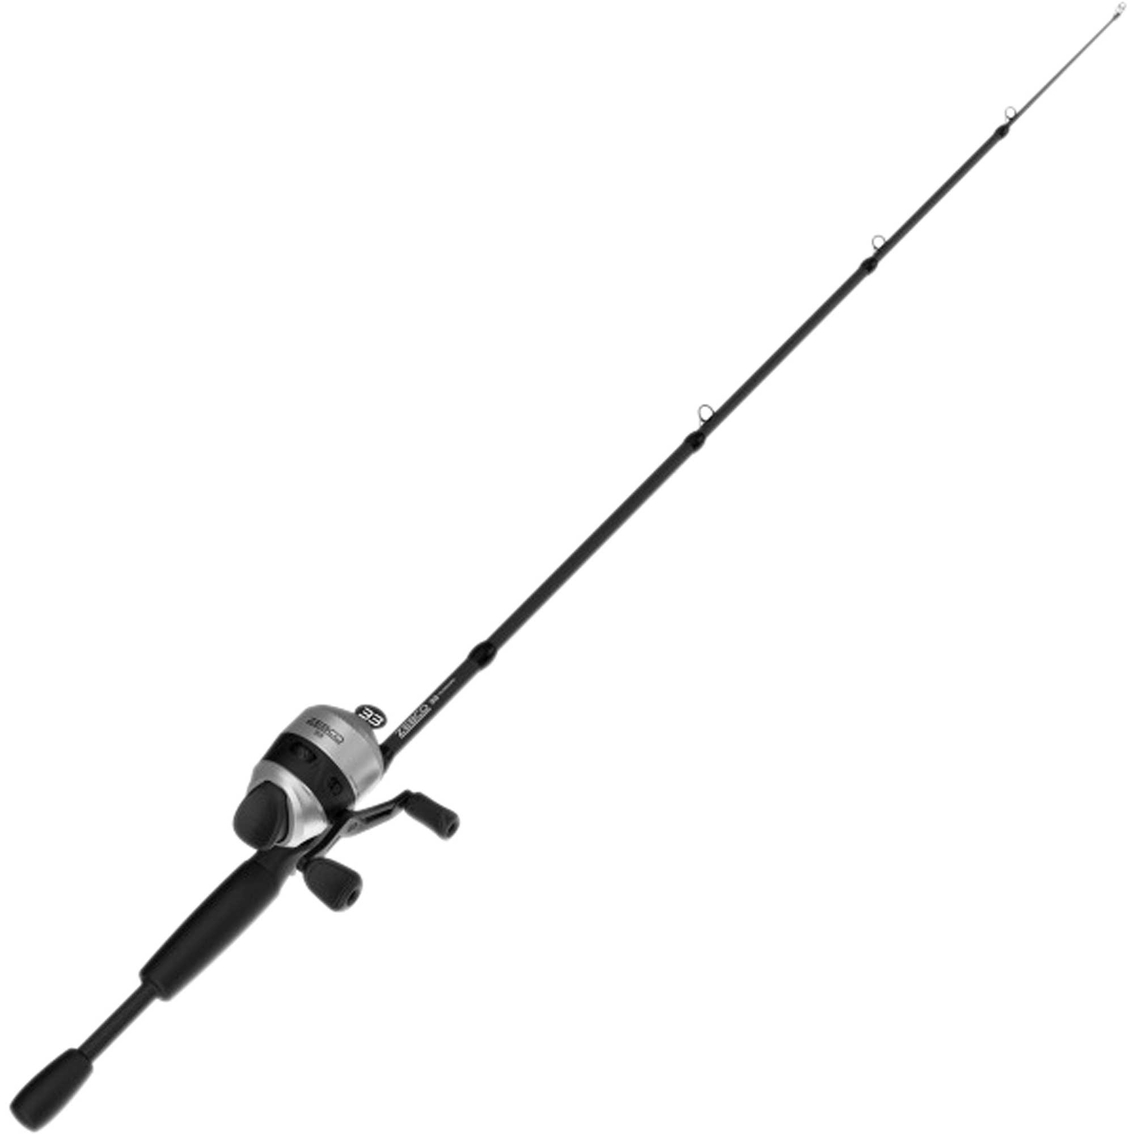 Zebco Telecast Fishing Rod And Reel | Freshwater Rods & Reels | Sports ...